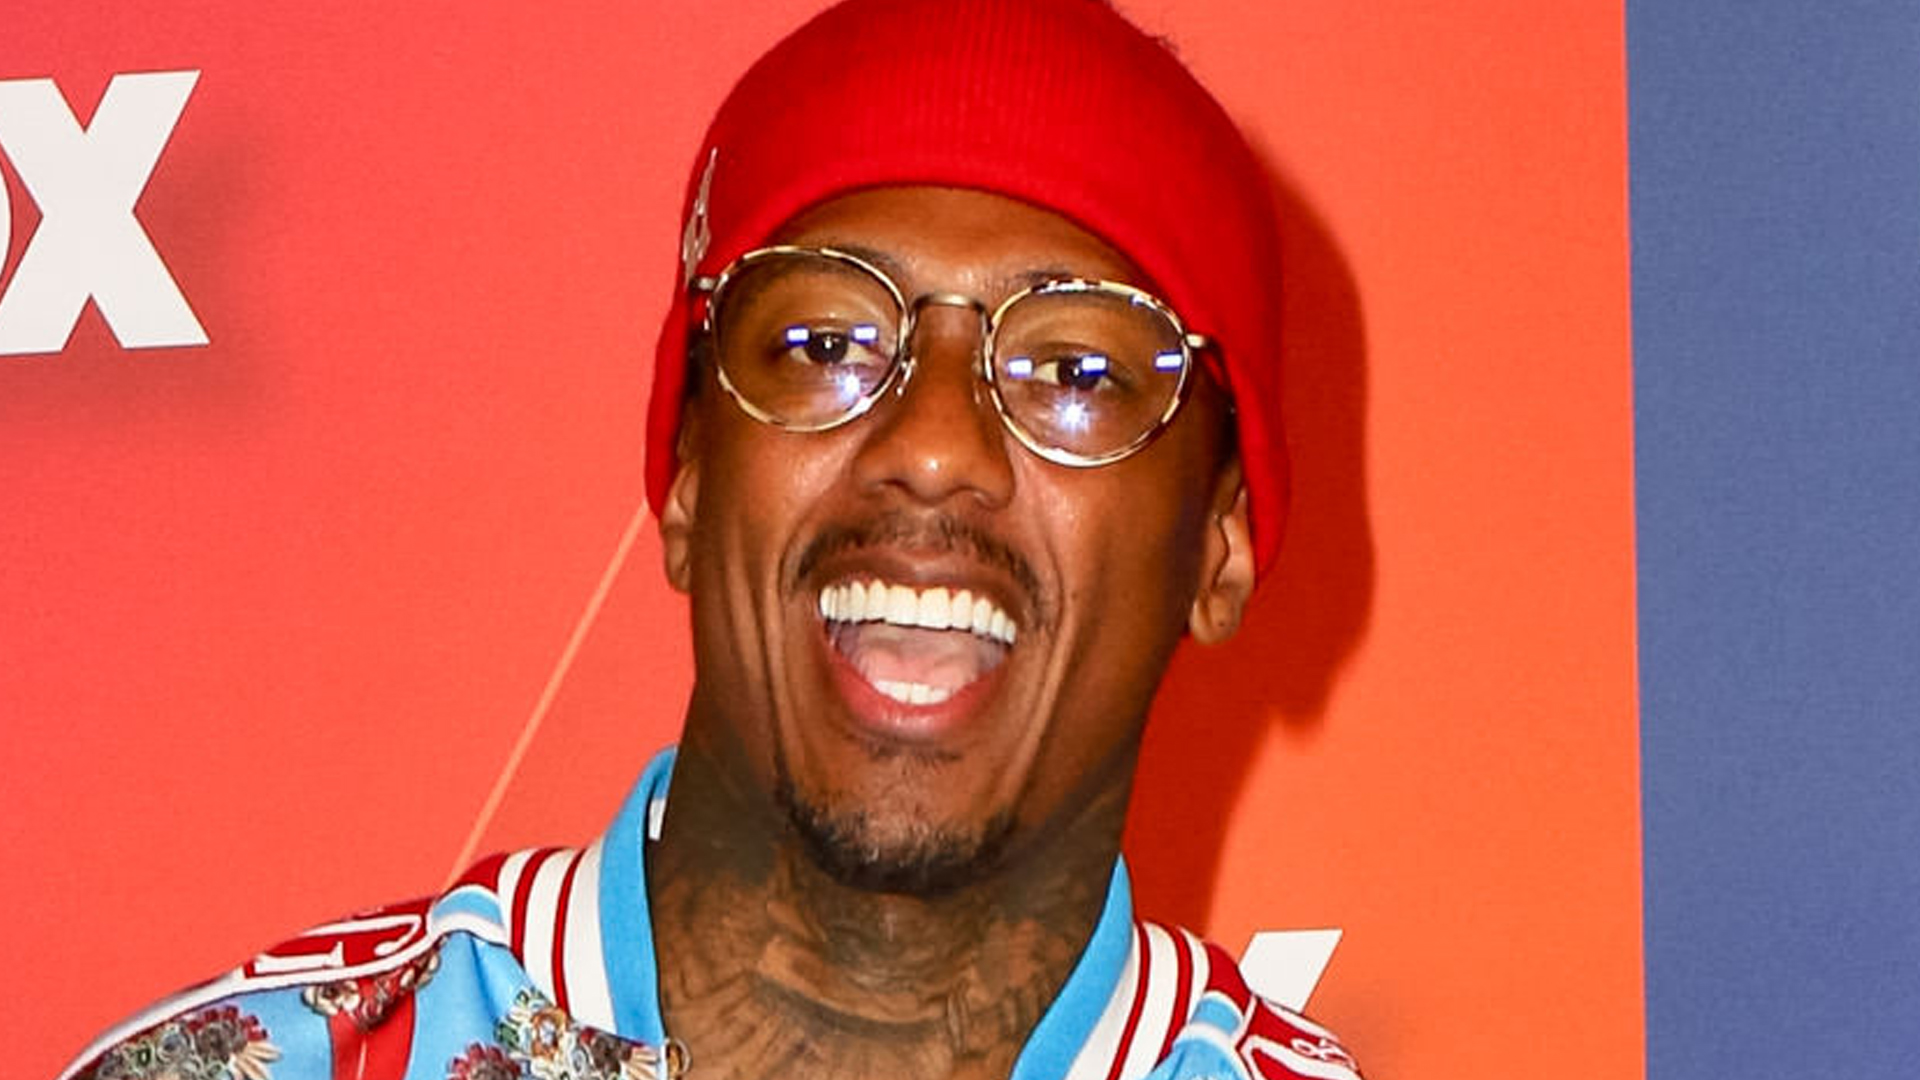 Nick Cannon's fans suspect he's secretly expecting his NINTH child after ex makes shock pregnancy announcement